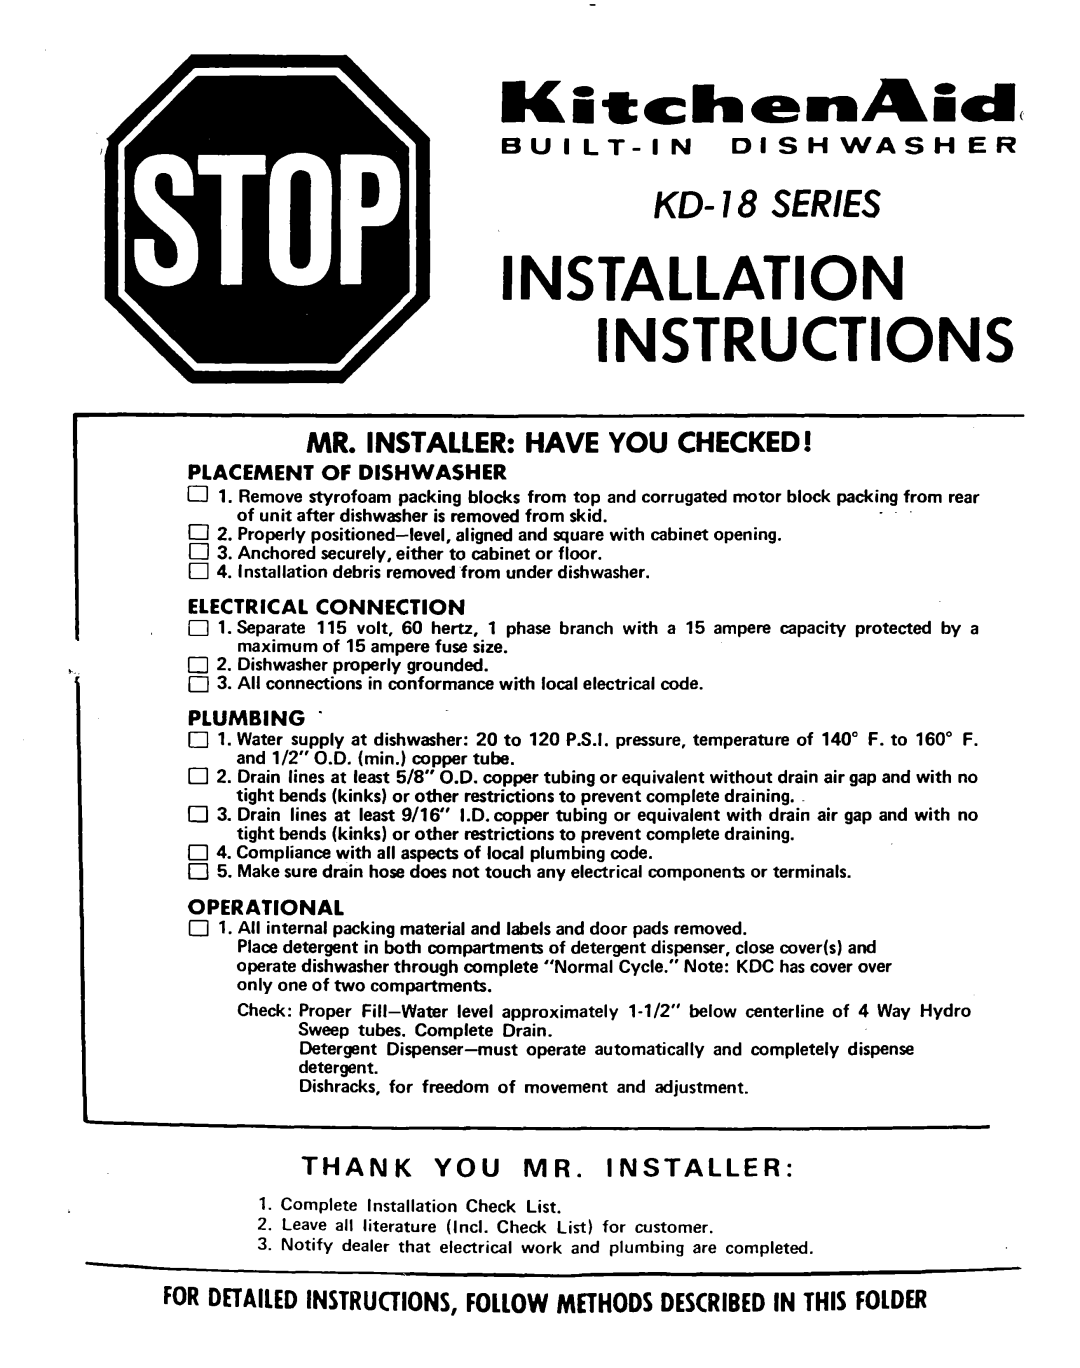 KitchenAid KD-18 installation instructions KD- I8 SERIES, Mr. Installer Have You Checked, Built-Indishwasher, Plumbing 